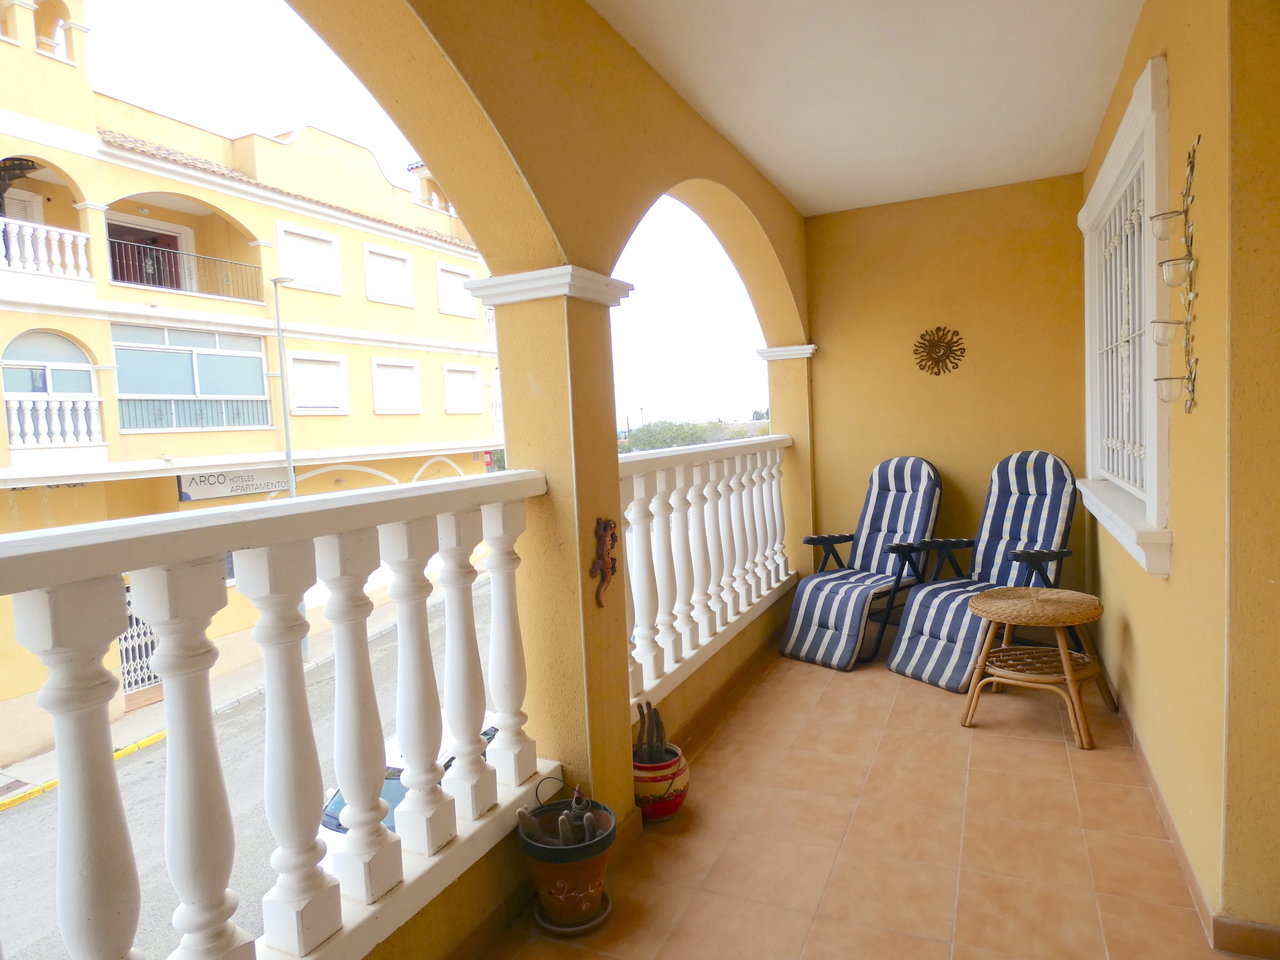 For Sale: Apartment in Algorfa Beds: 2 Baths: 1 Price: 94,995€